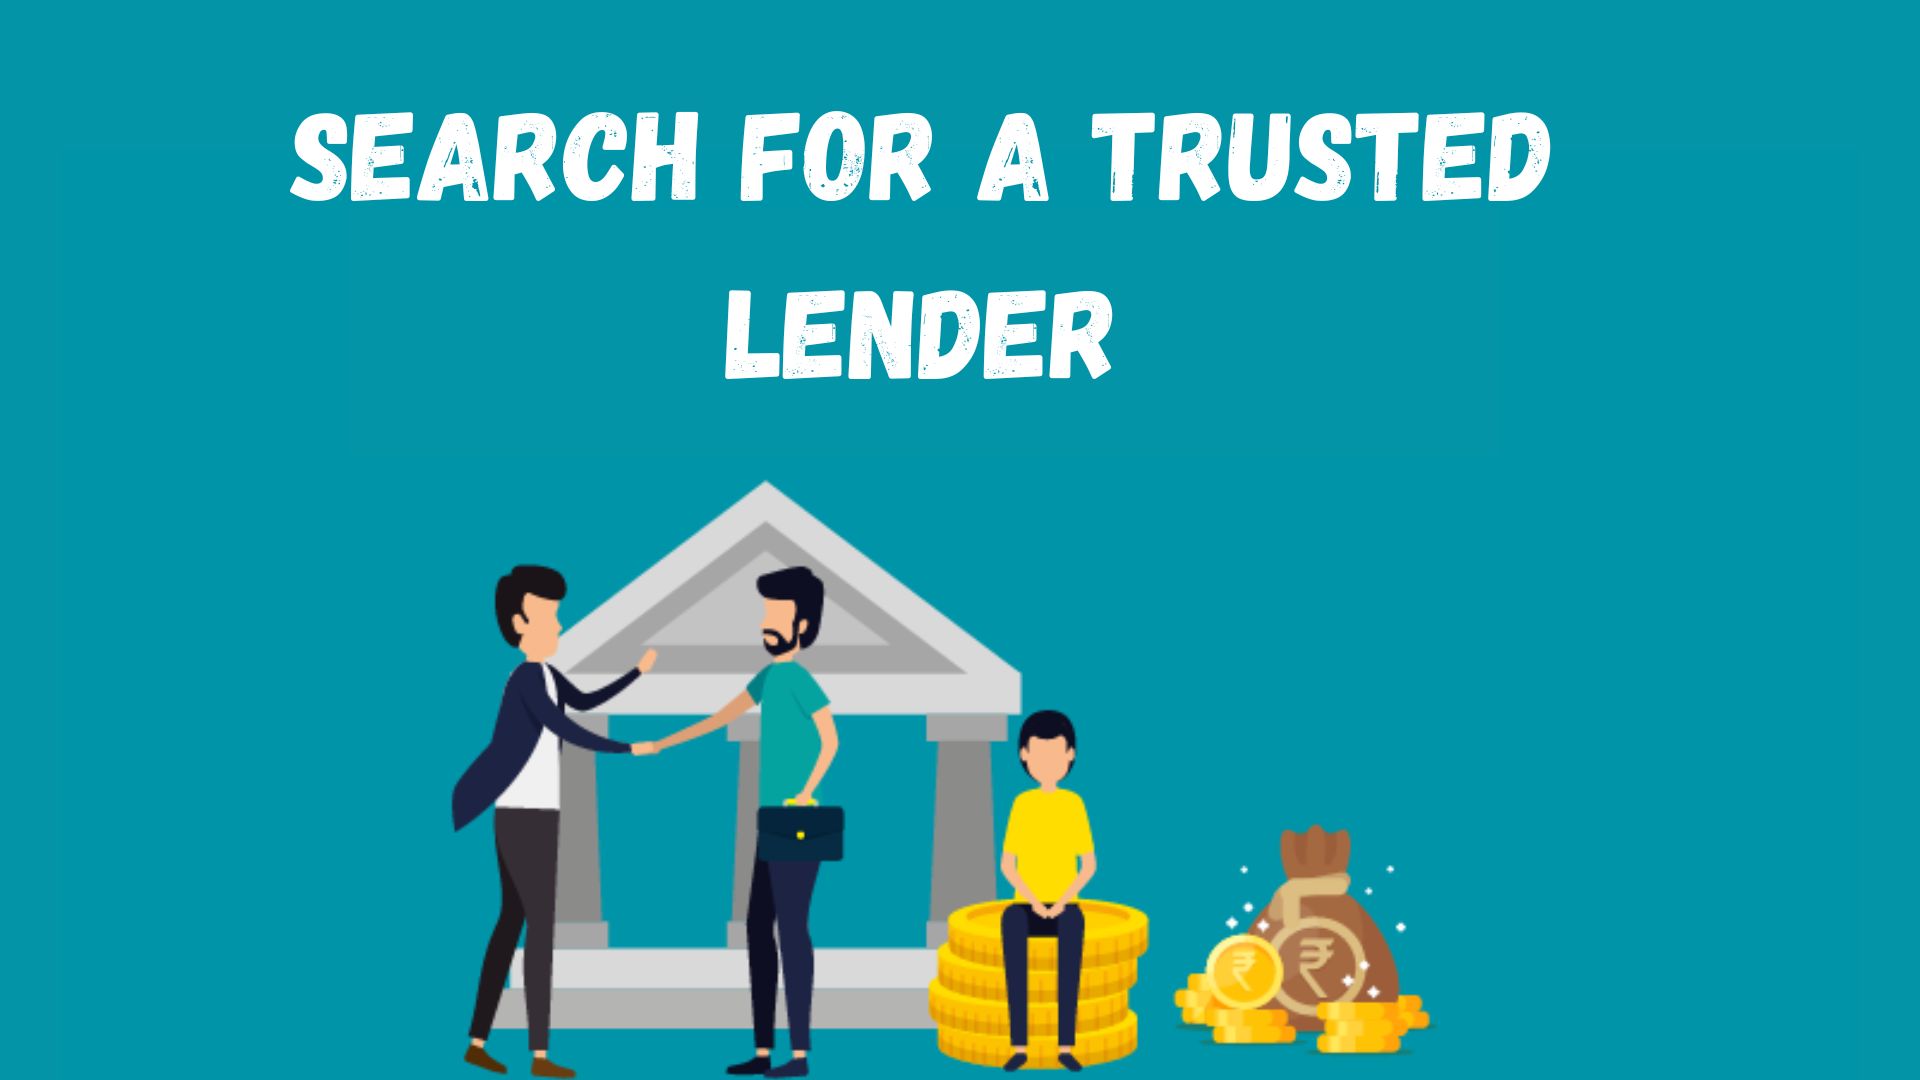 The Search for a Trusted Lender